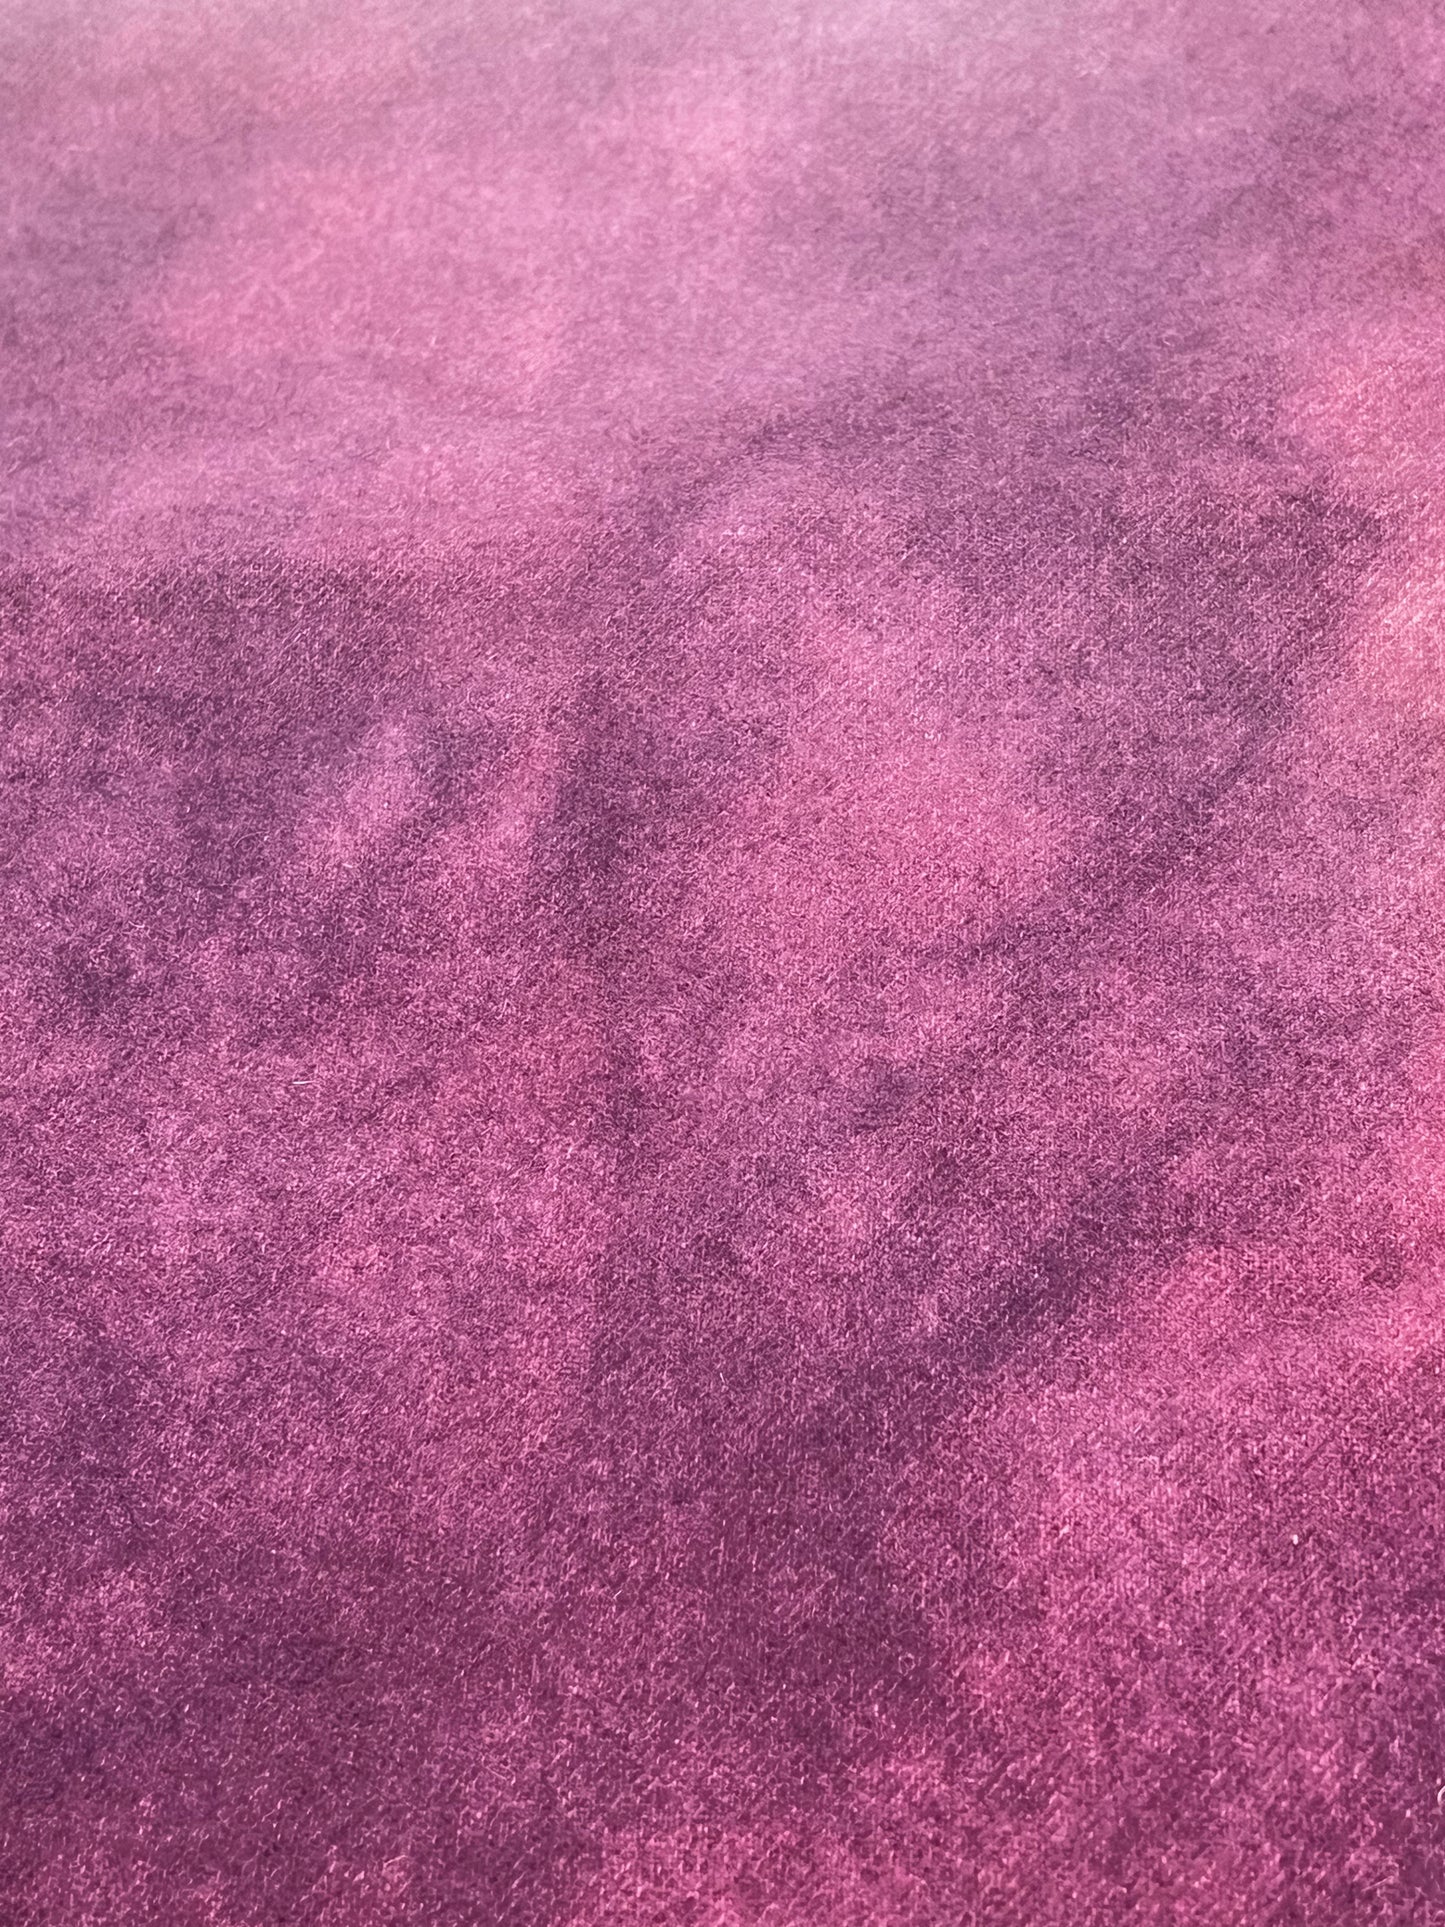 Hand Dyed Wool, Fat Quarter, PURPLE BERRY